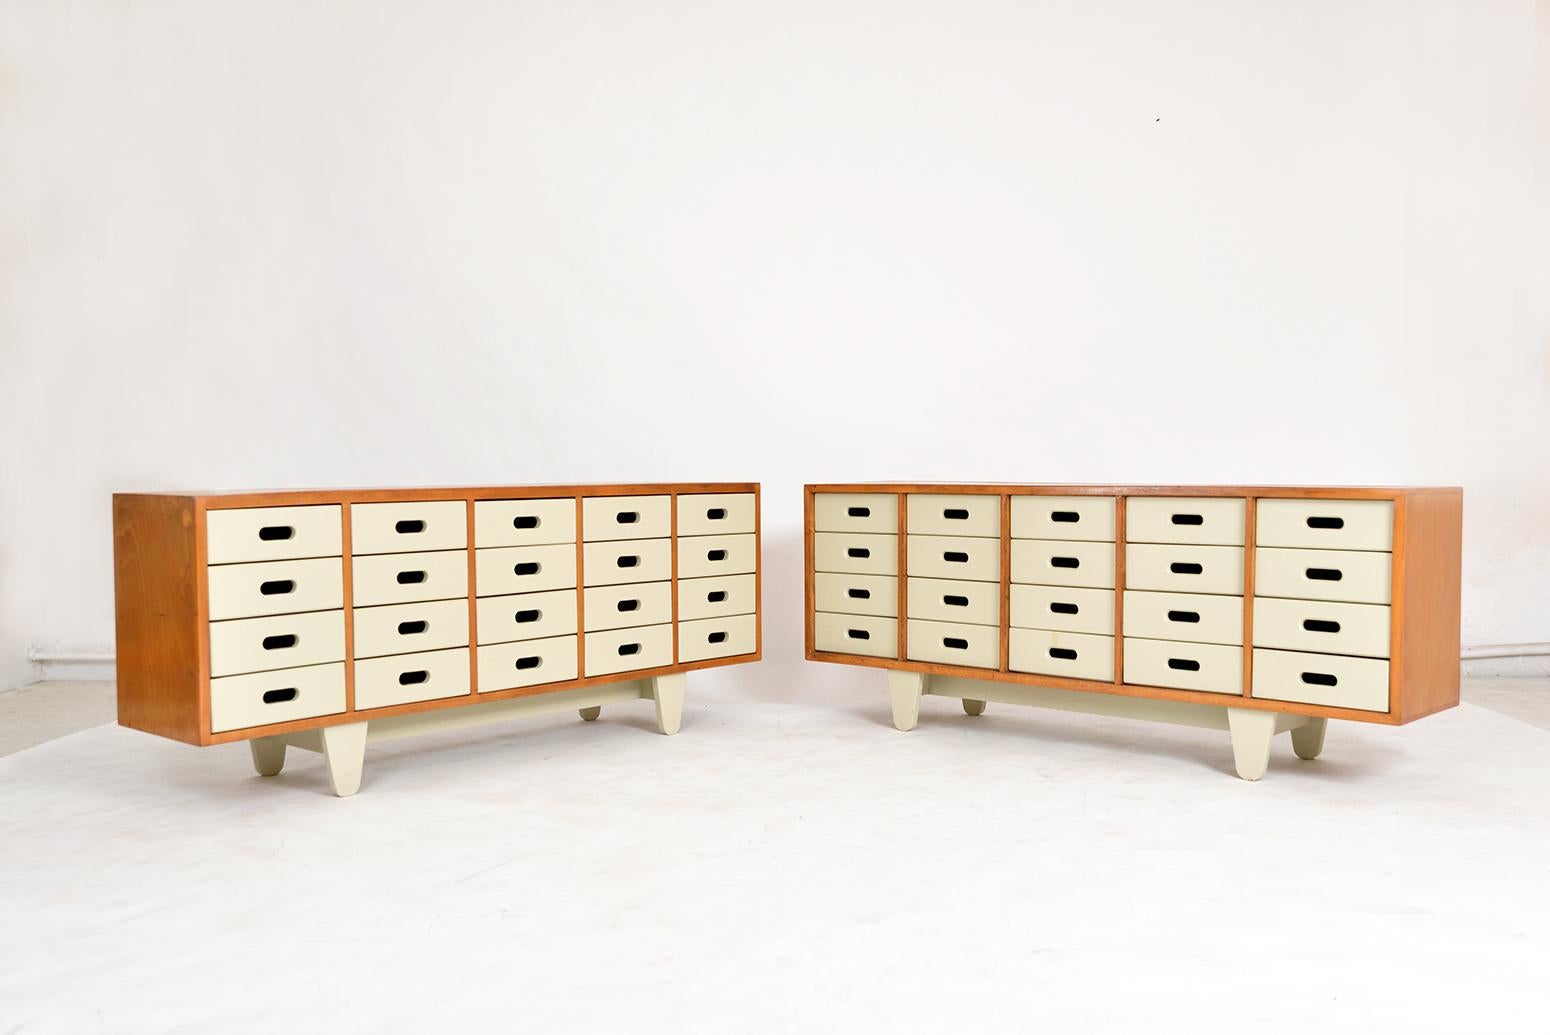 A near pair of drawer units designed by James Leonard for Esavian ESA (Educational Supply Association), a leading UK supplier of school furniture. These are the rarely seen 5 x 4 multi-drawer arrangement, as apposed to the most common 4 x 5. 
In